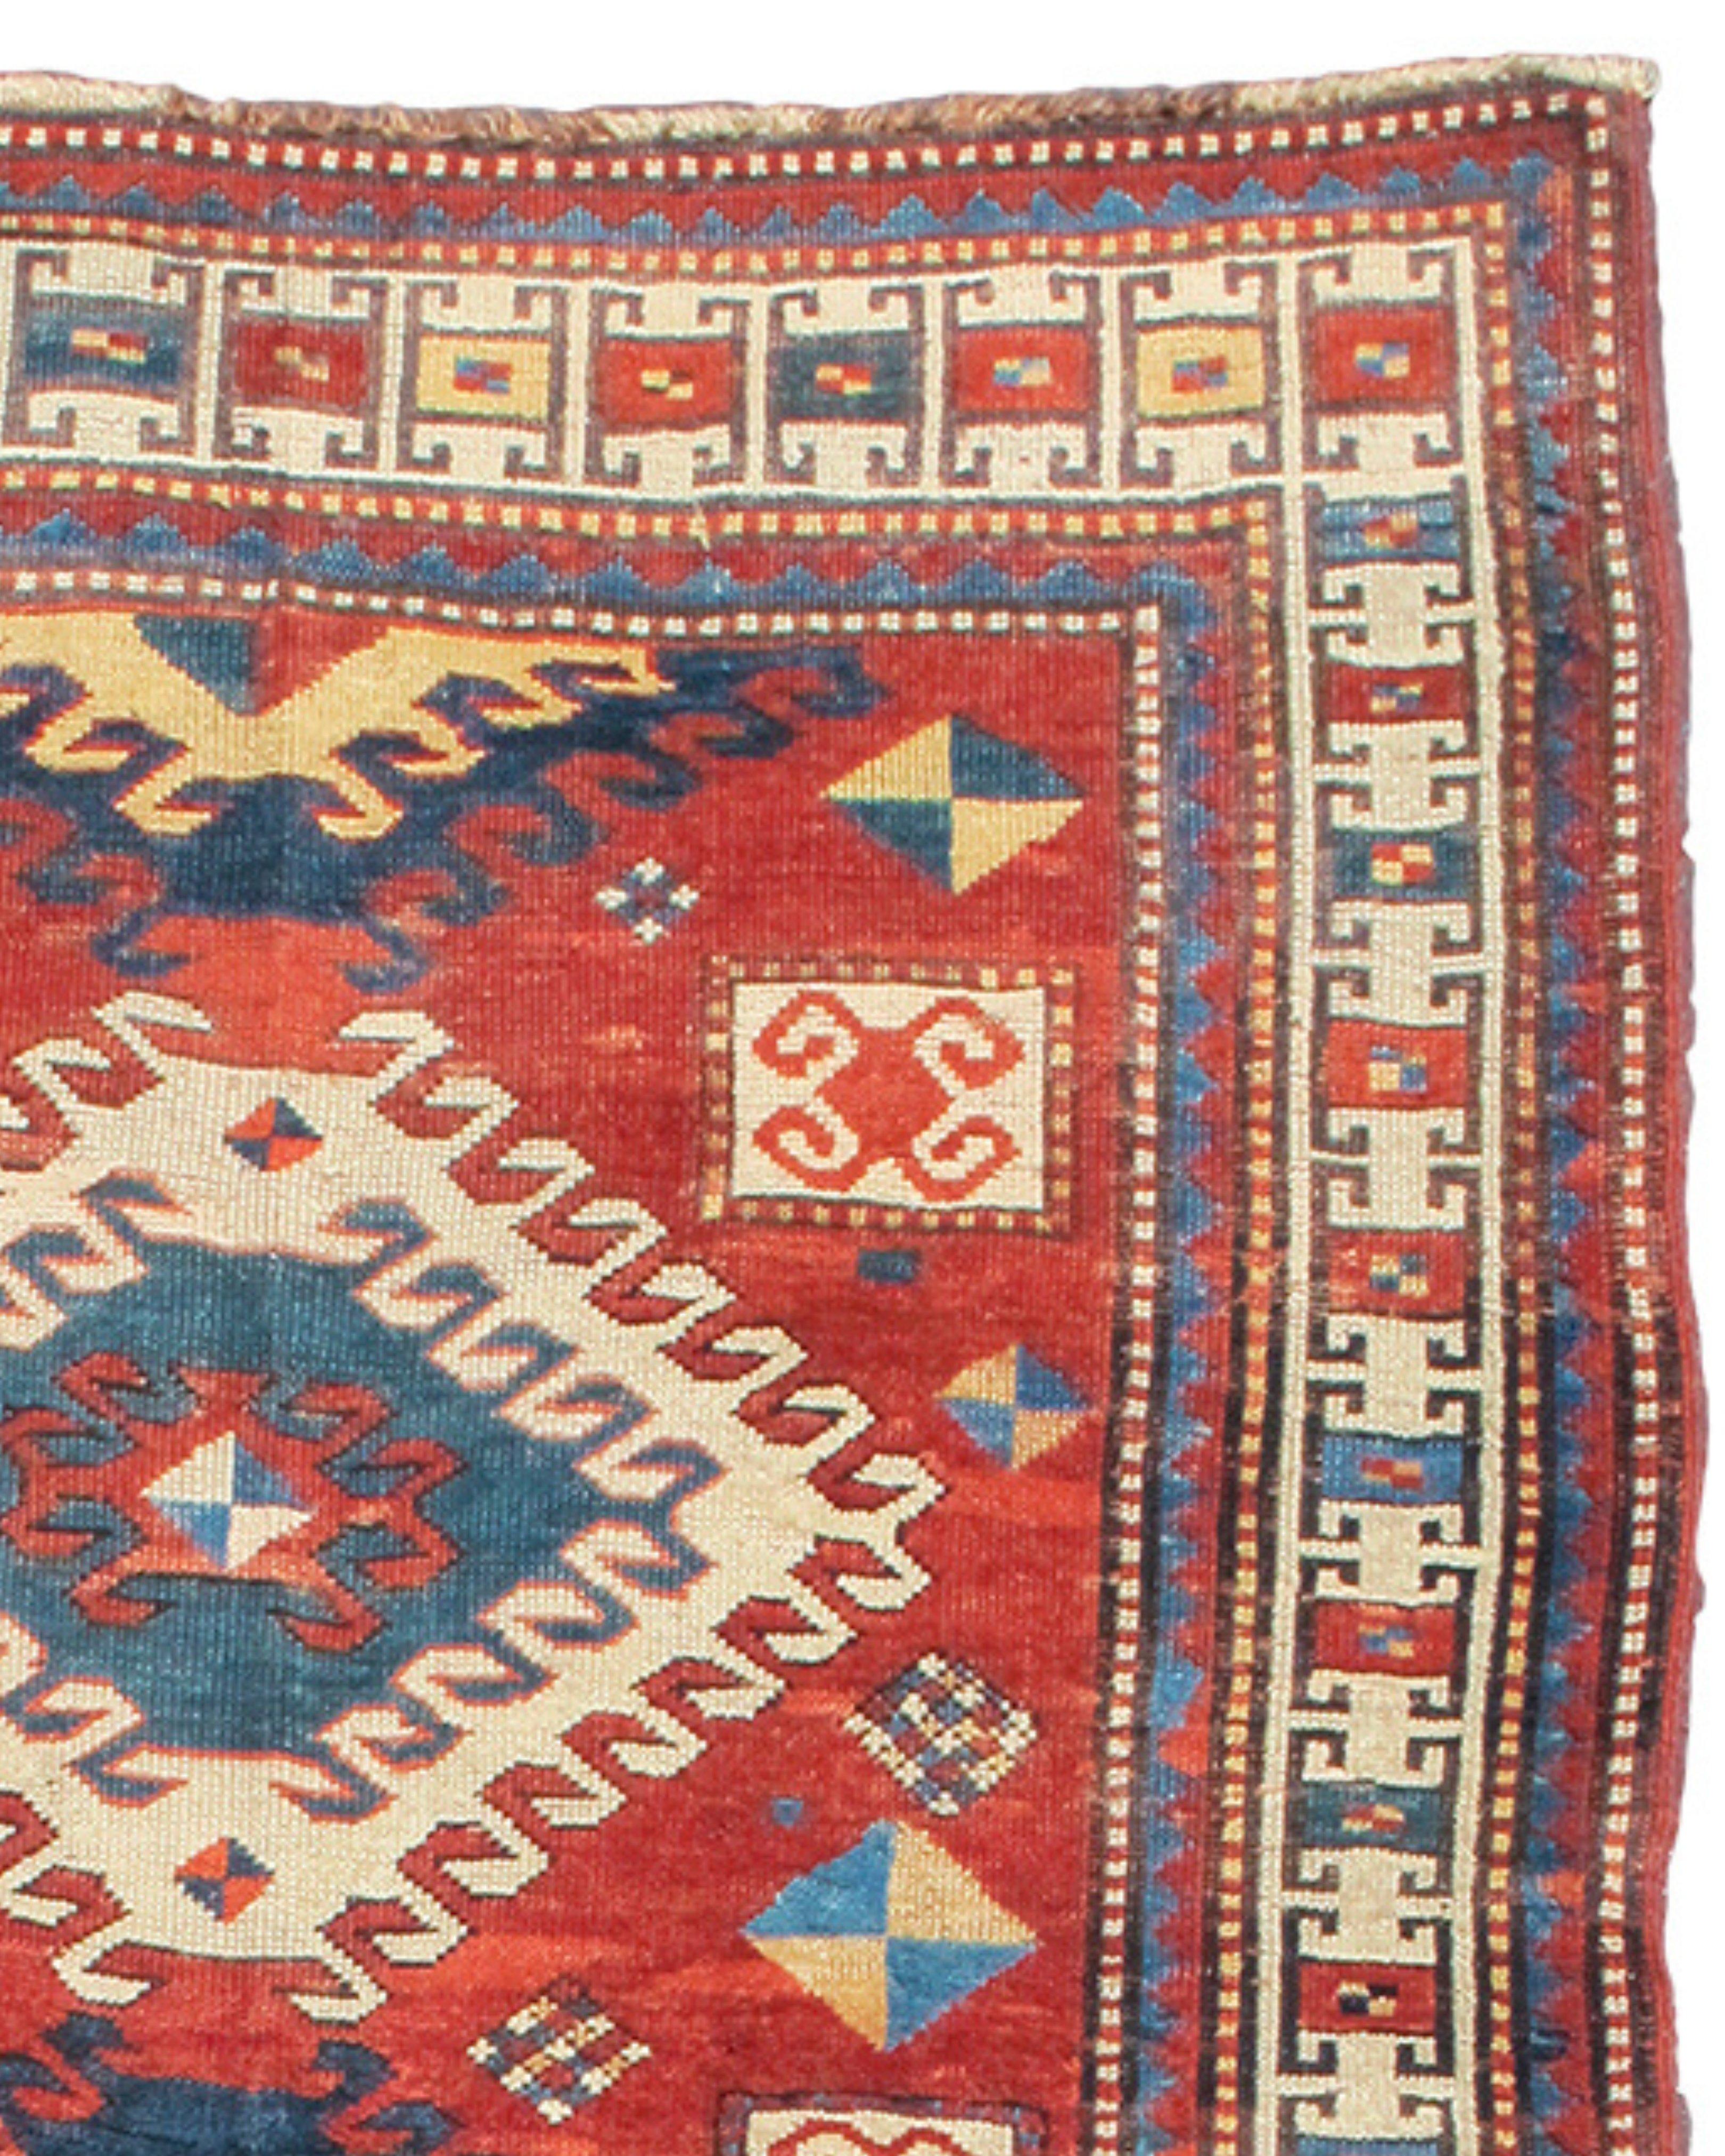 Bordjalu Kazak Rug, Late 19th Century

Woven in remote villages of the Caucus Mountains, Kazak rugs are renowned for their bold graphic design and purity of color. This Bordjalu Kazak variant draws three alternating latch-hook diamonds against a